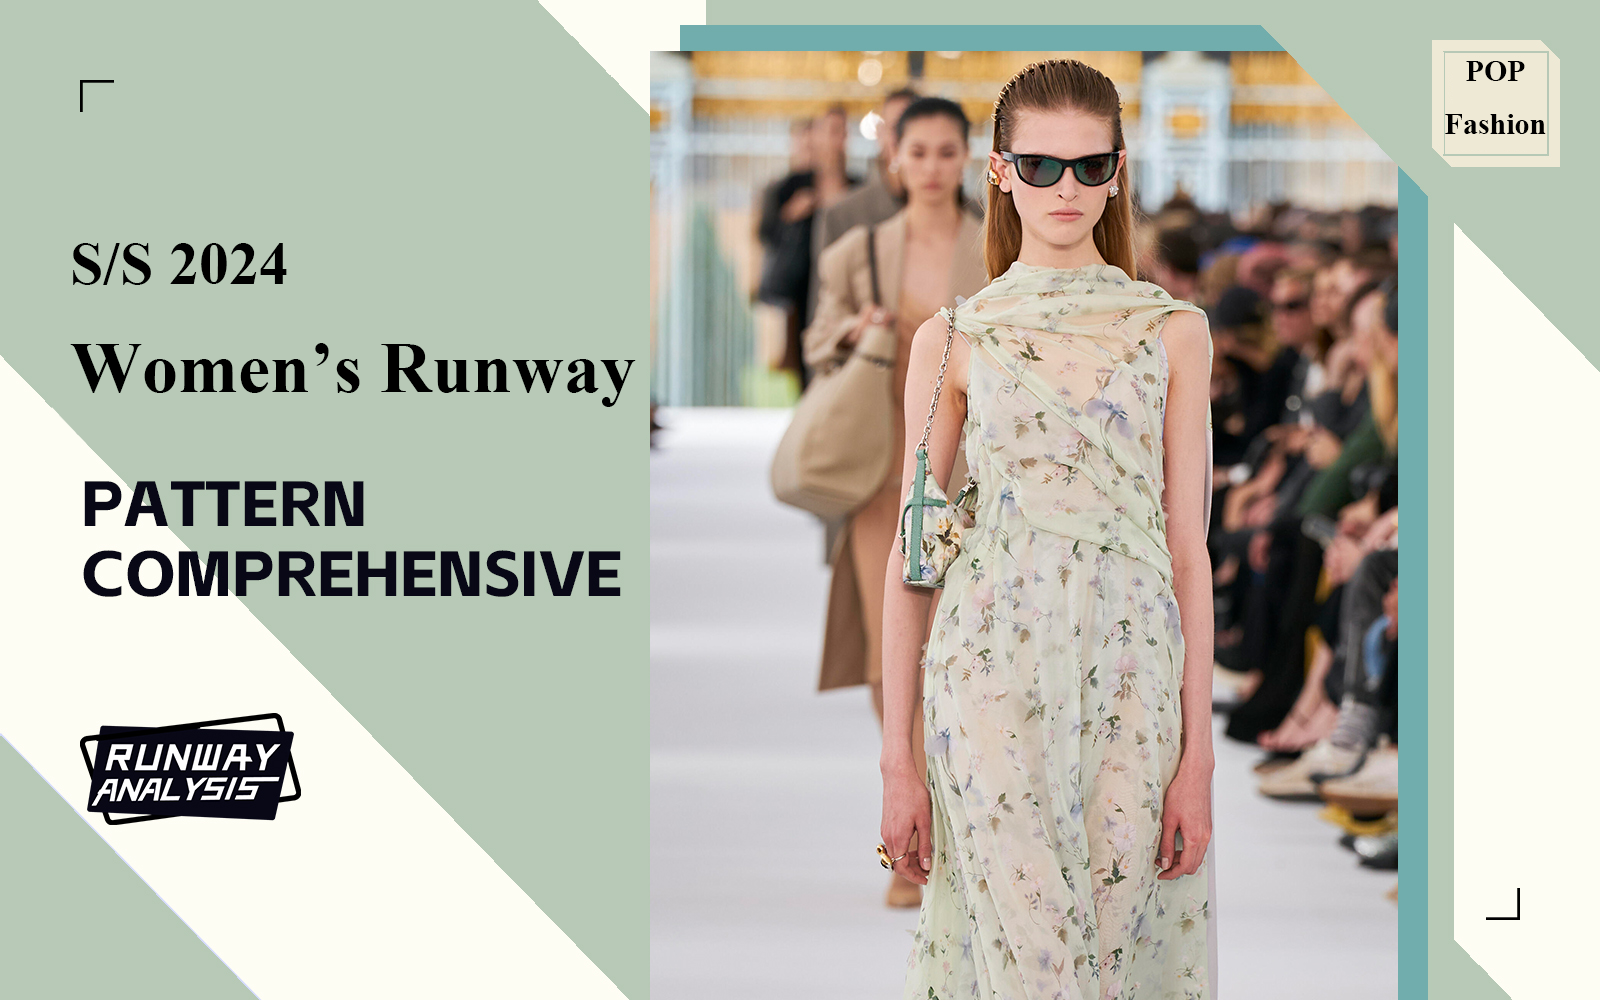 Seek for Floral Sea -- The Comprehensive Pattern Analysis of Women's Runway